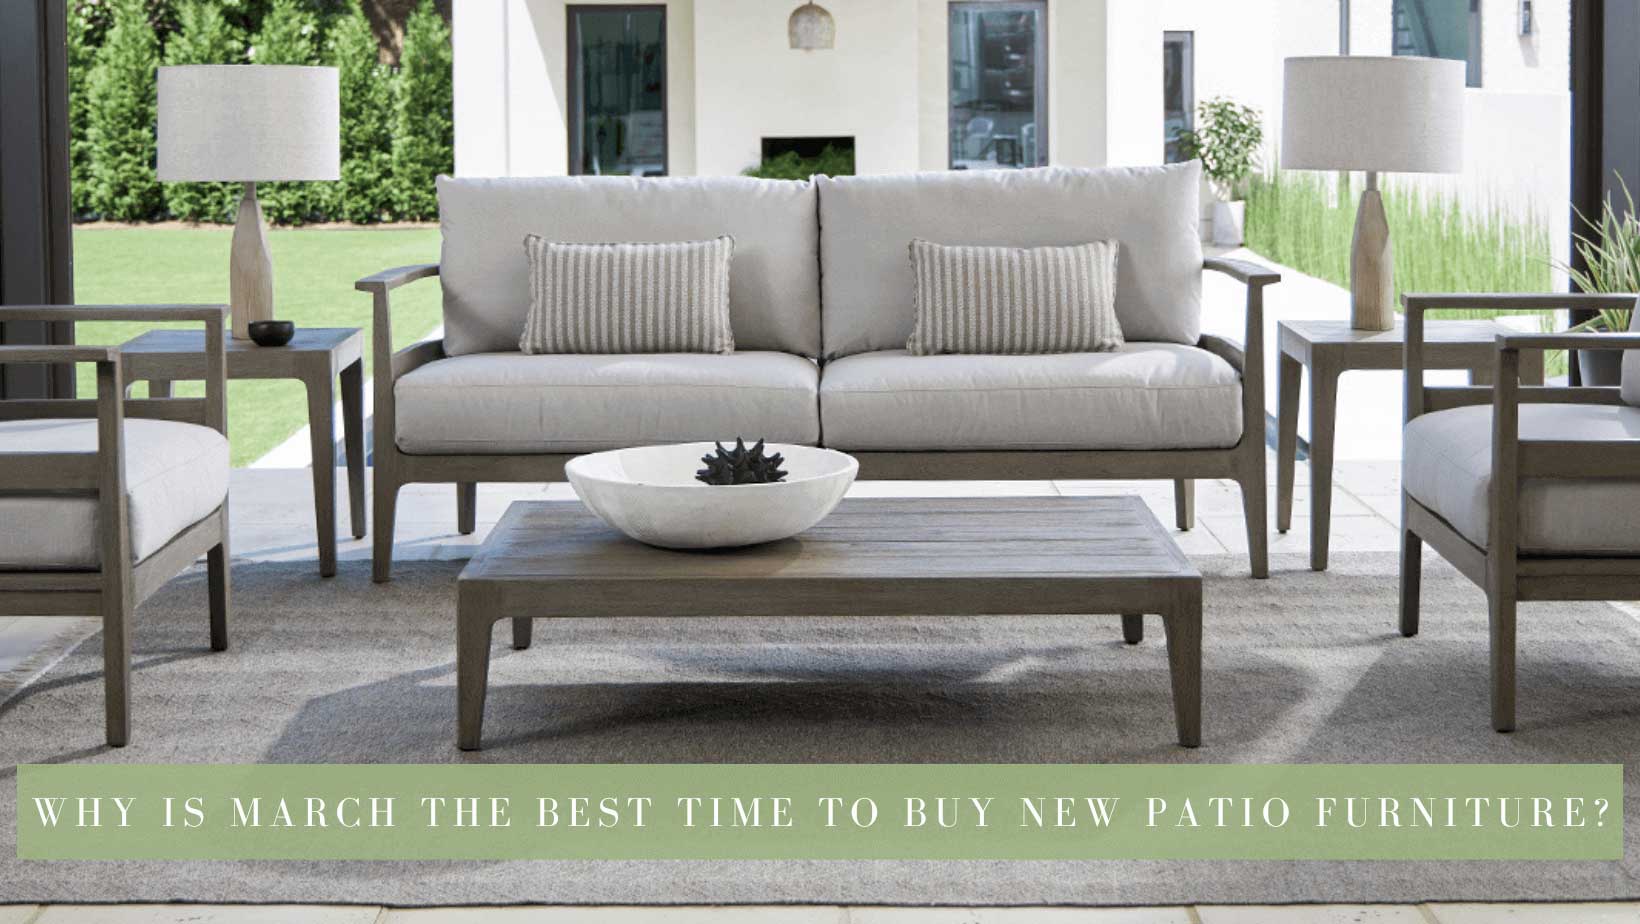 Why is march the best time to buy new patio furniture?